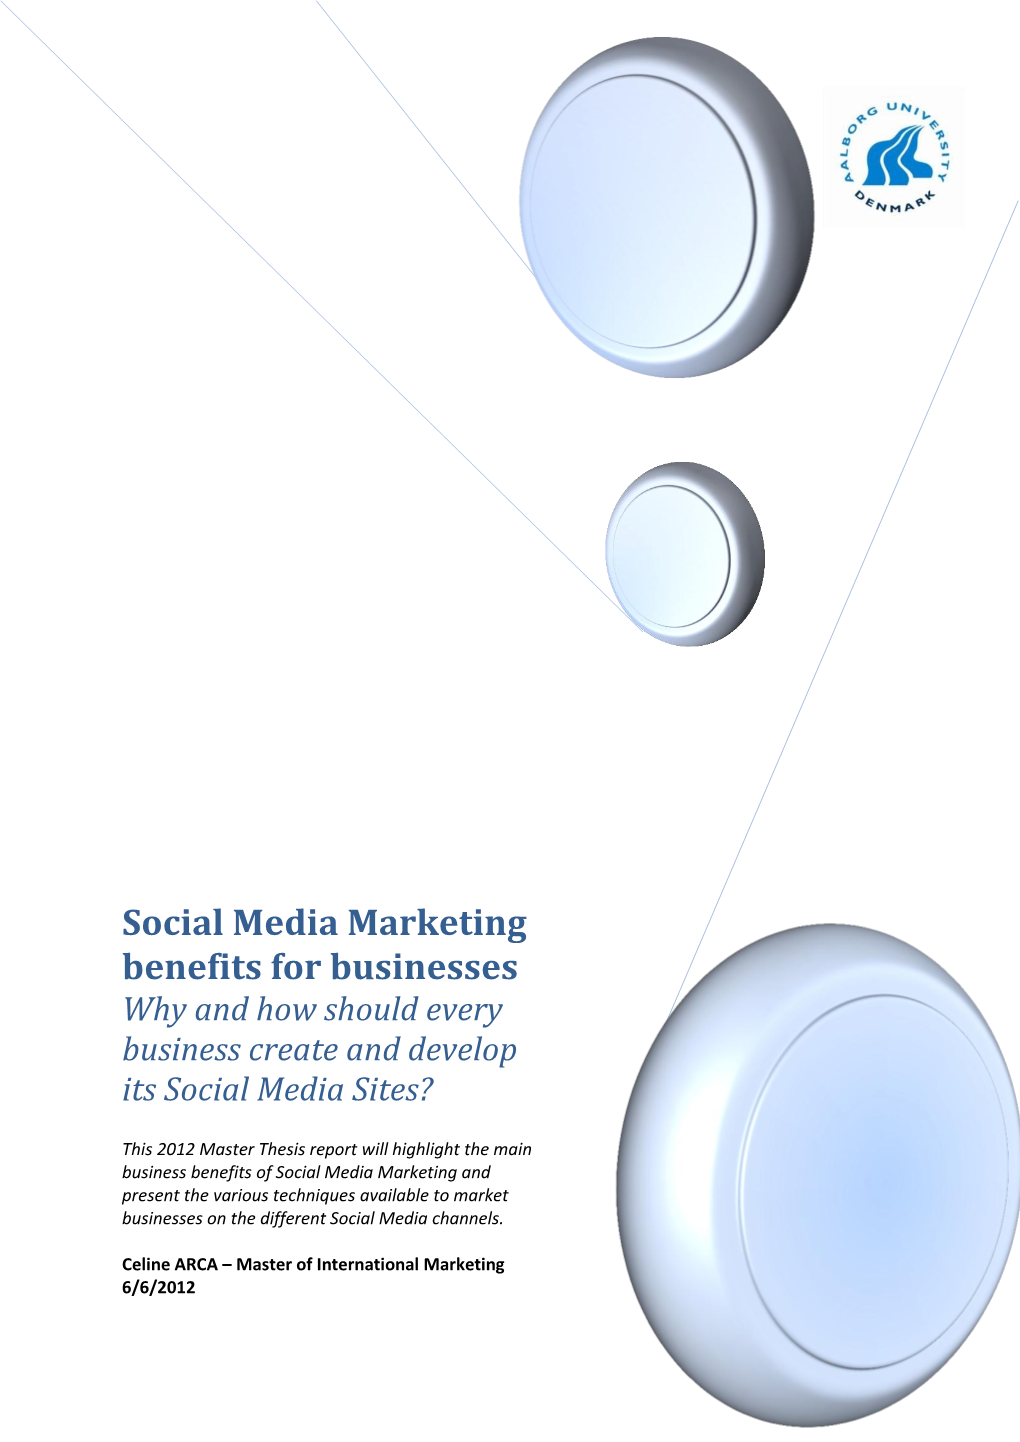 Social Media Marketing Benefits for Businesses Why and How Should Every Business Create and Develop Its Social Media Sites?